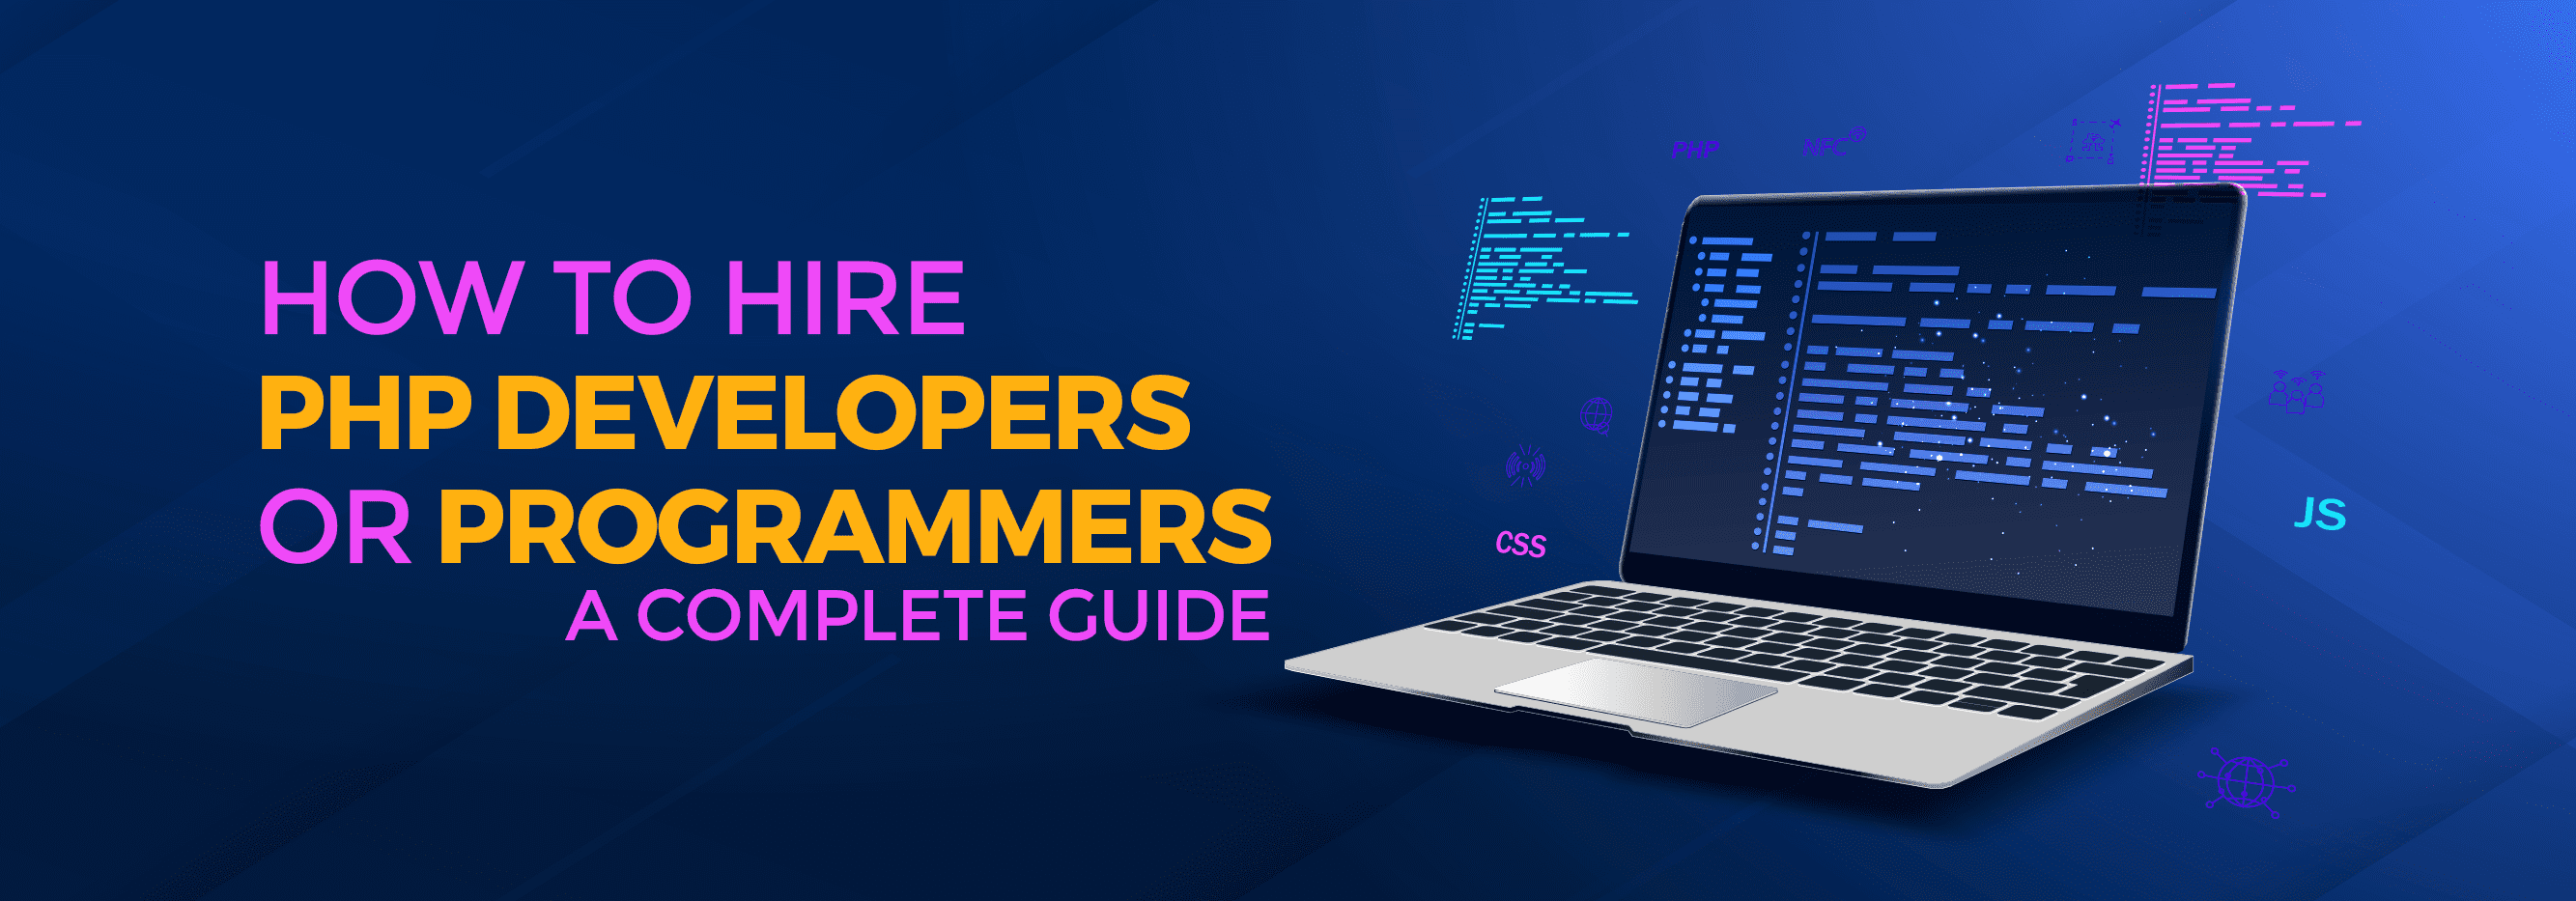 How to Hire PHP Developers or programmers- A Complete Guide_banner